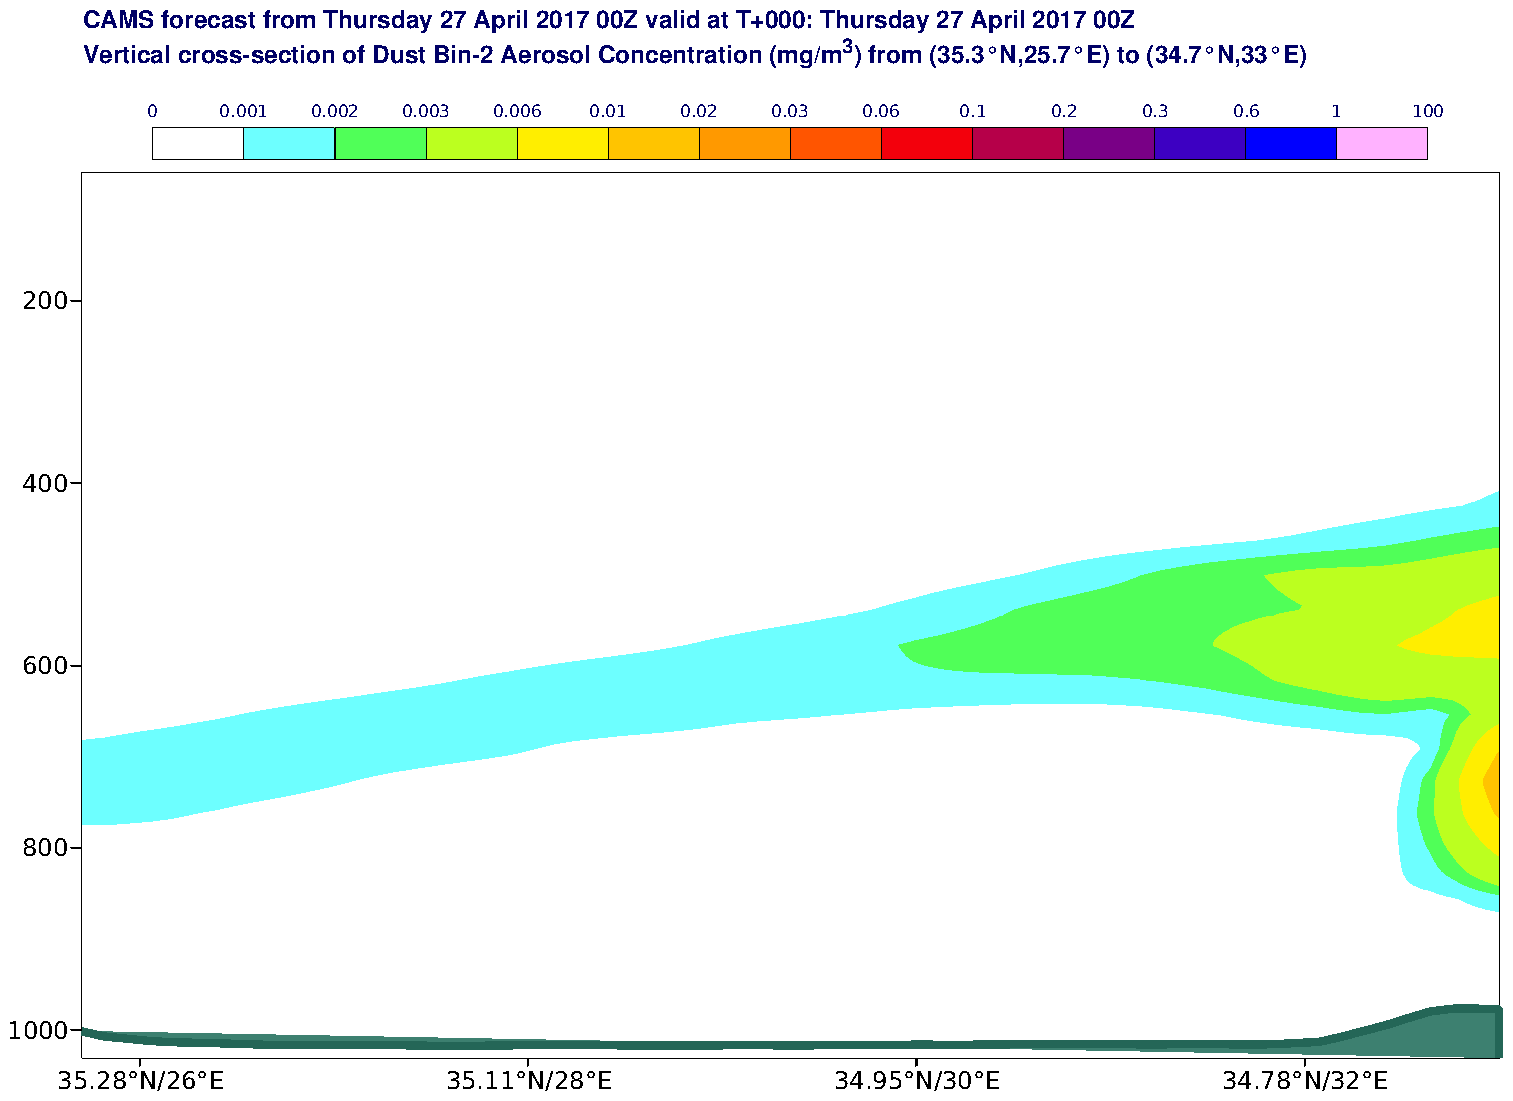 Vertical cross-section of Dust Bin-2 Aerosol Concentration (mg/m3) valid at T0 - 2017-04-27 00:00